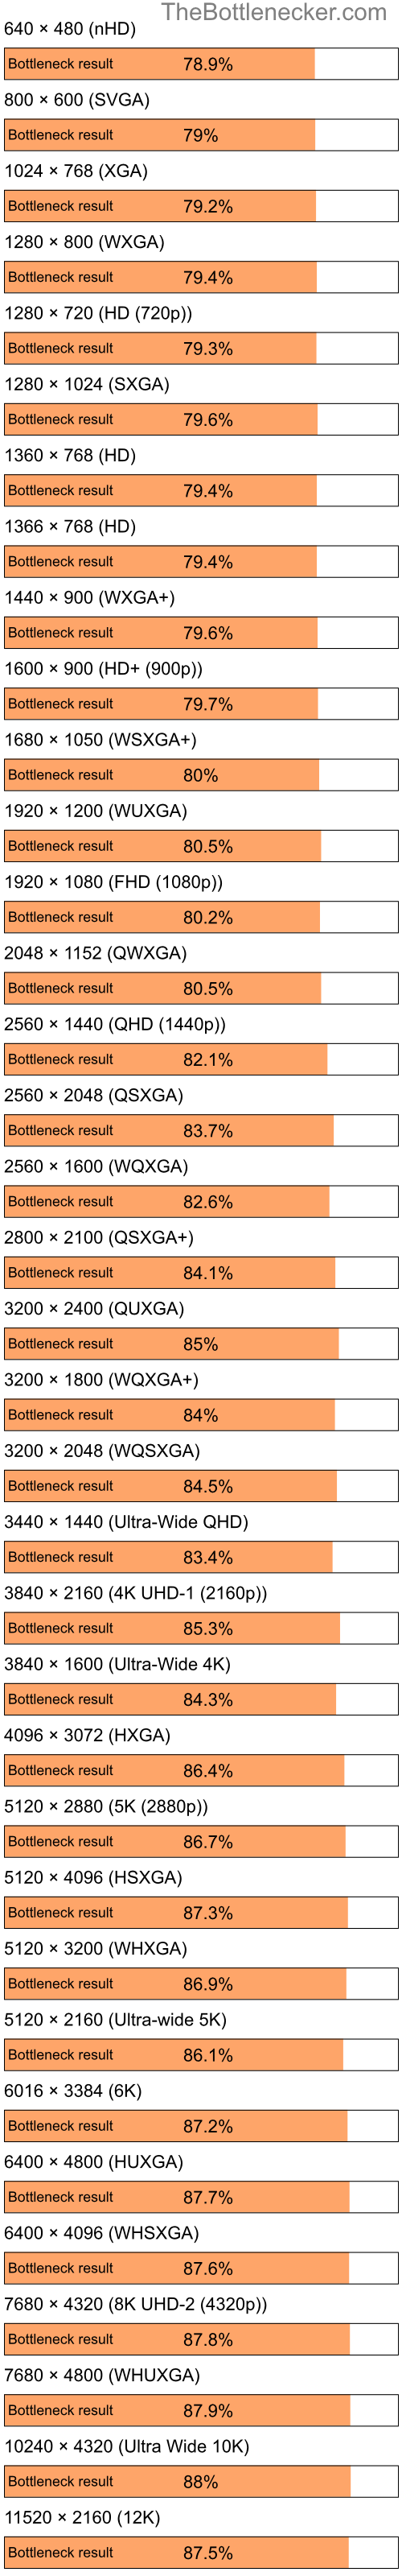 Bottleneck results by resolution for Intel Celeron and NVIDIA GeForce 6500 in Graphic Card Intense Tasks